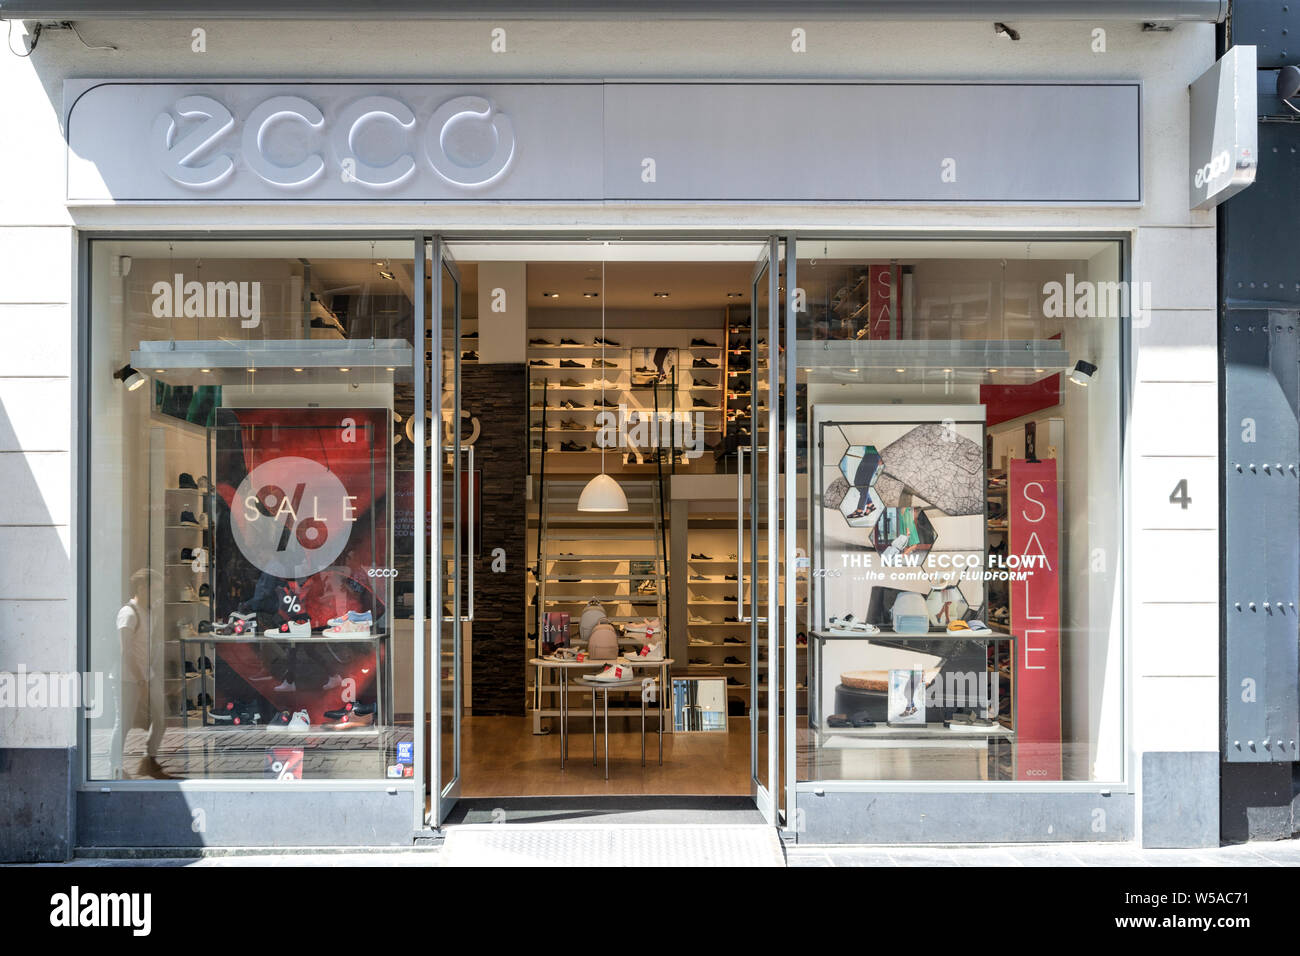 Ecco store stock and - Alamy